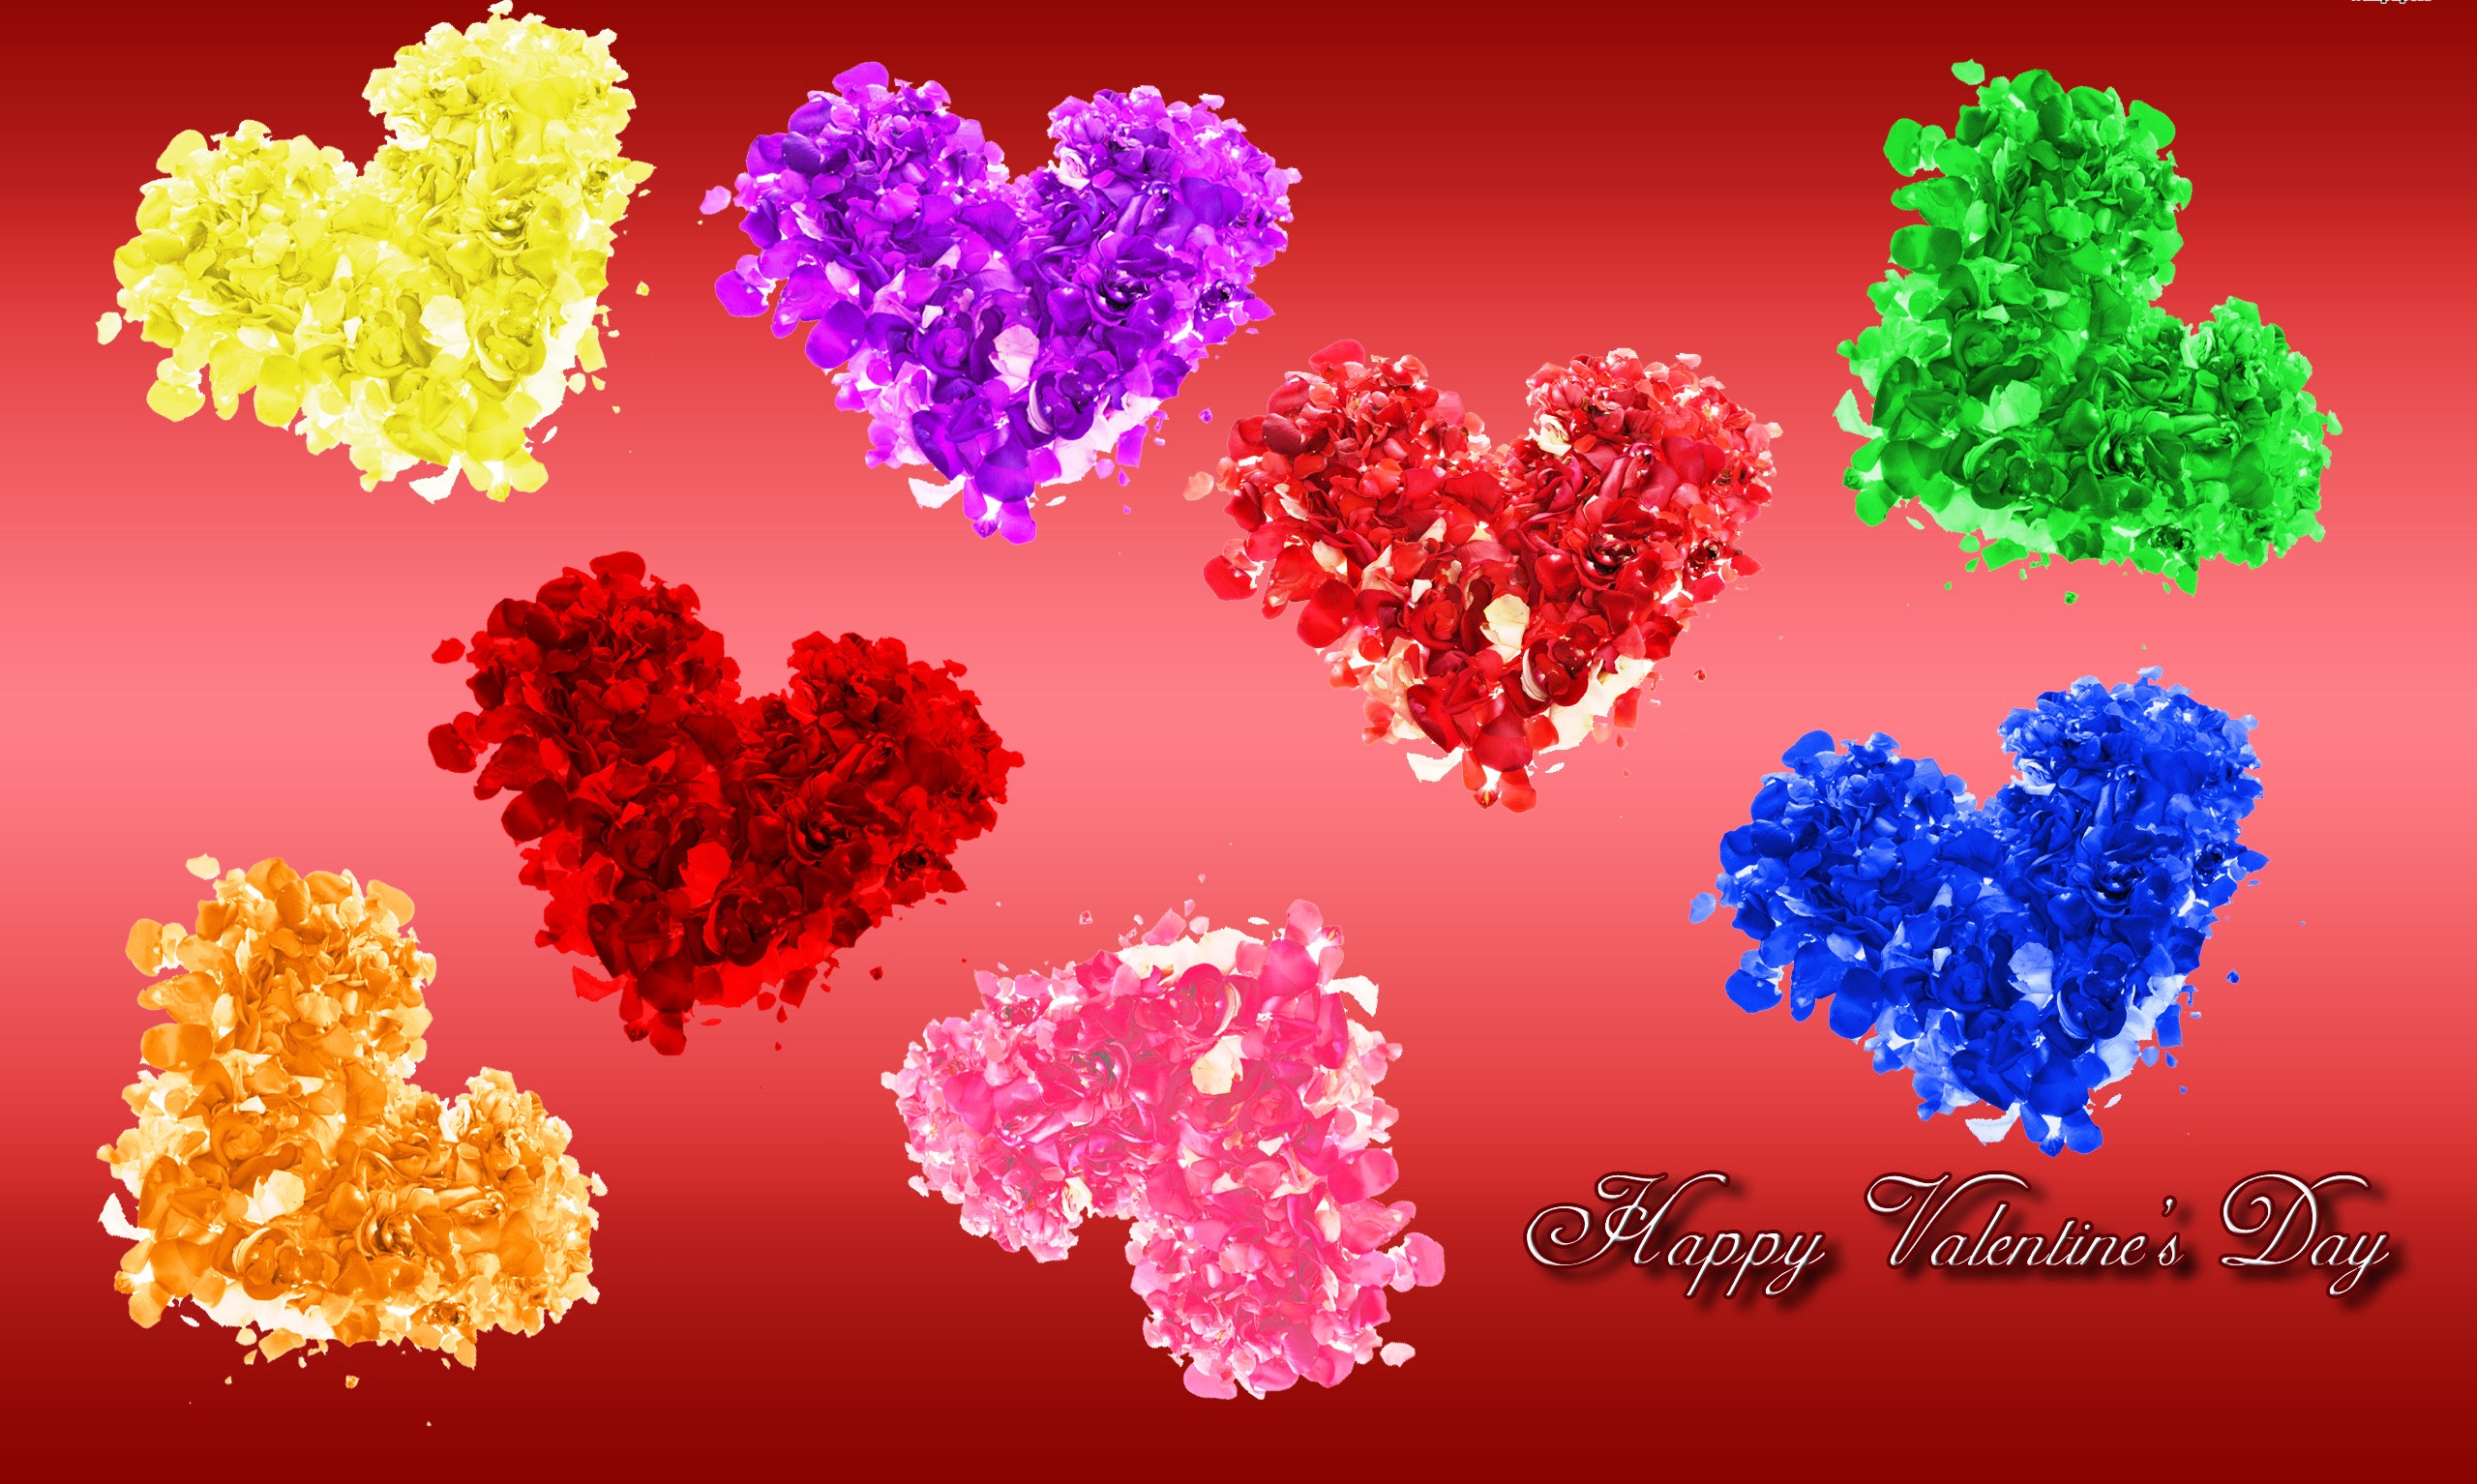 Beautiful Rose Valentine's Day Wallpaper - Universal Unique Tubes